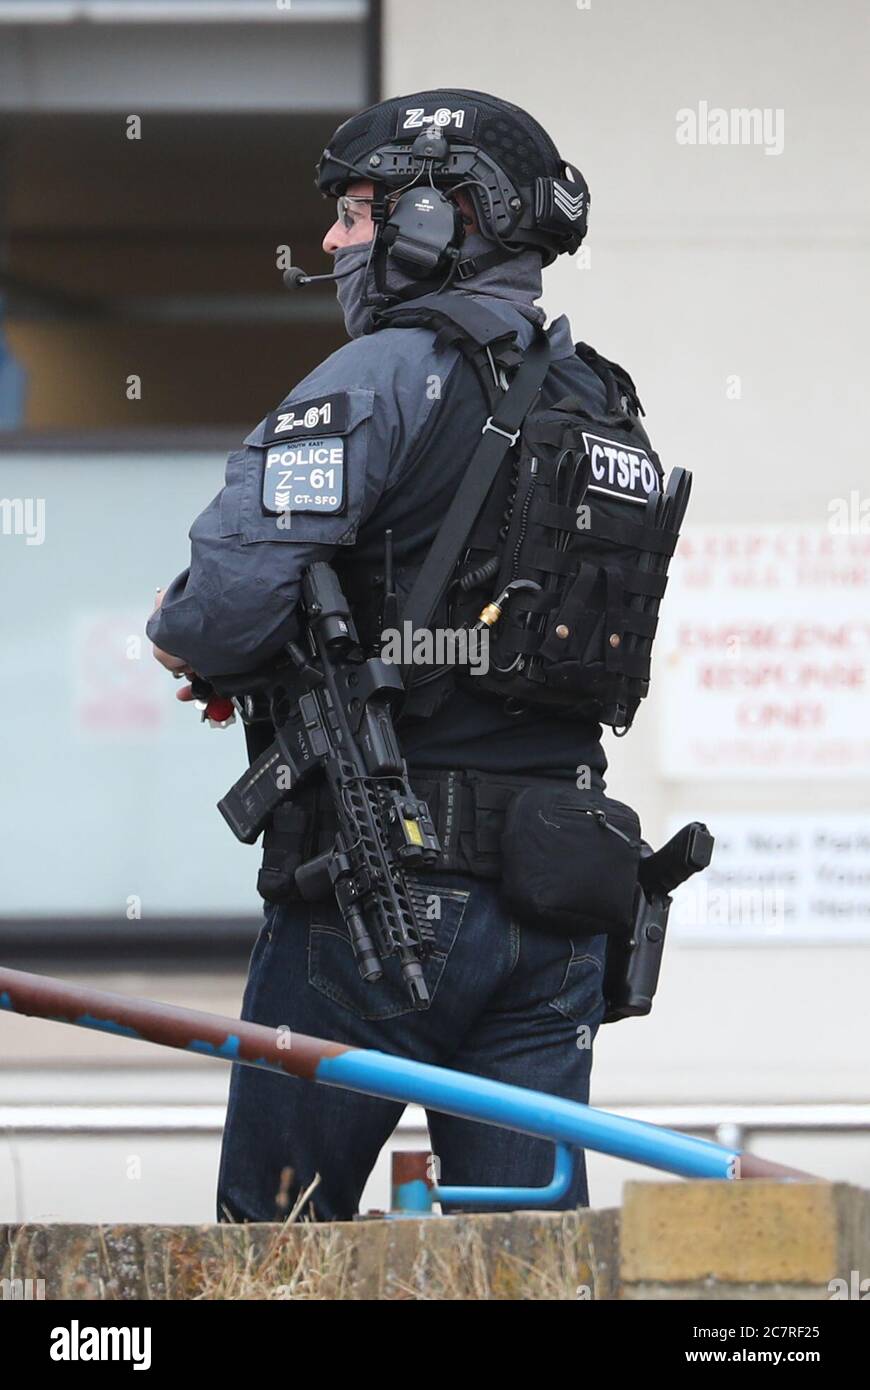 A Counter Terrorist Specialist Firearms Officer at the Royal Sussex County Hospital in Brighton, a man has been arrested on suspicion of attempted murder after a member of hospital staff was stabbed, according to police. Stock Photo